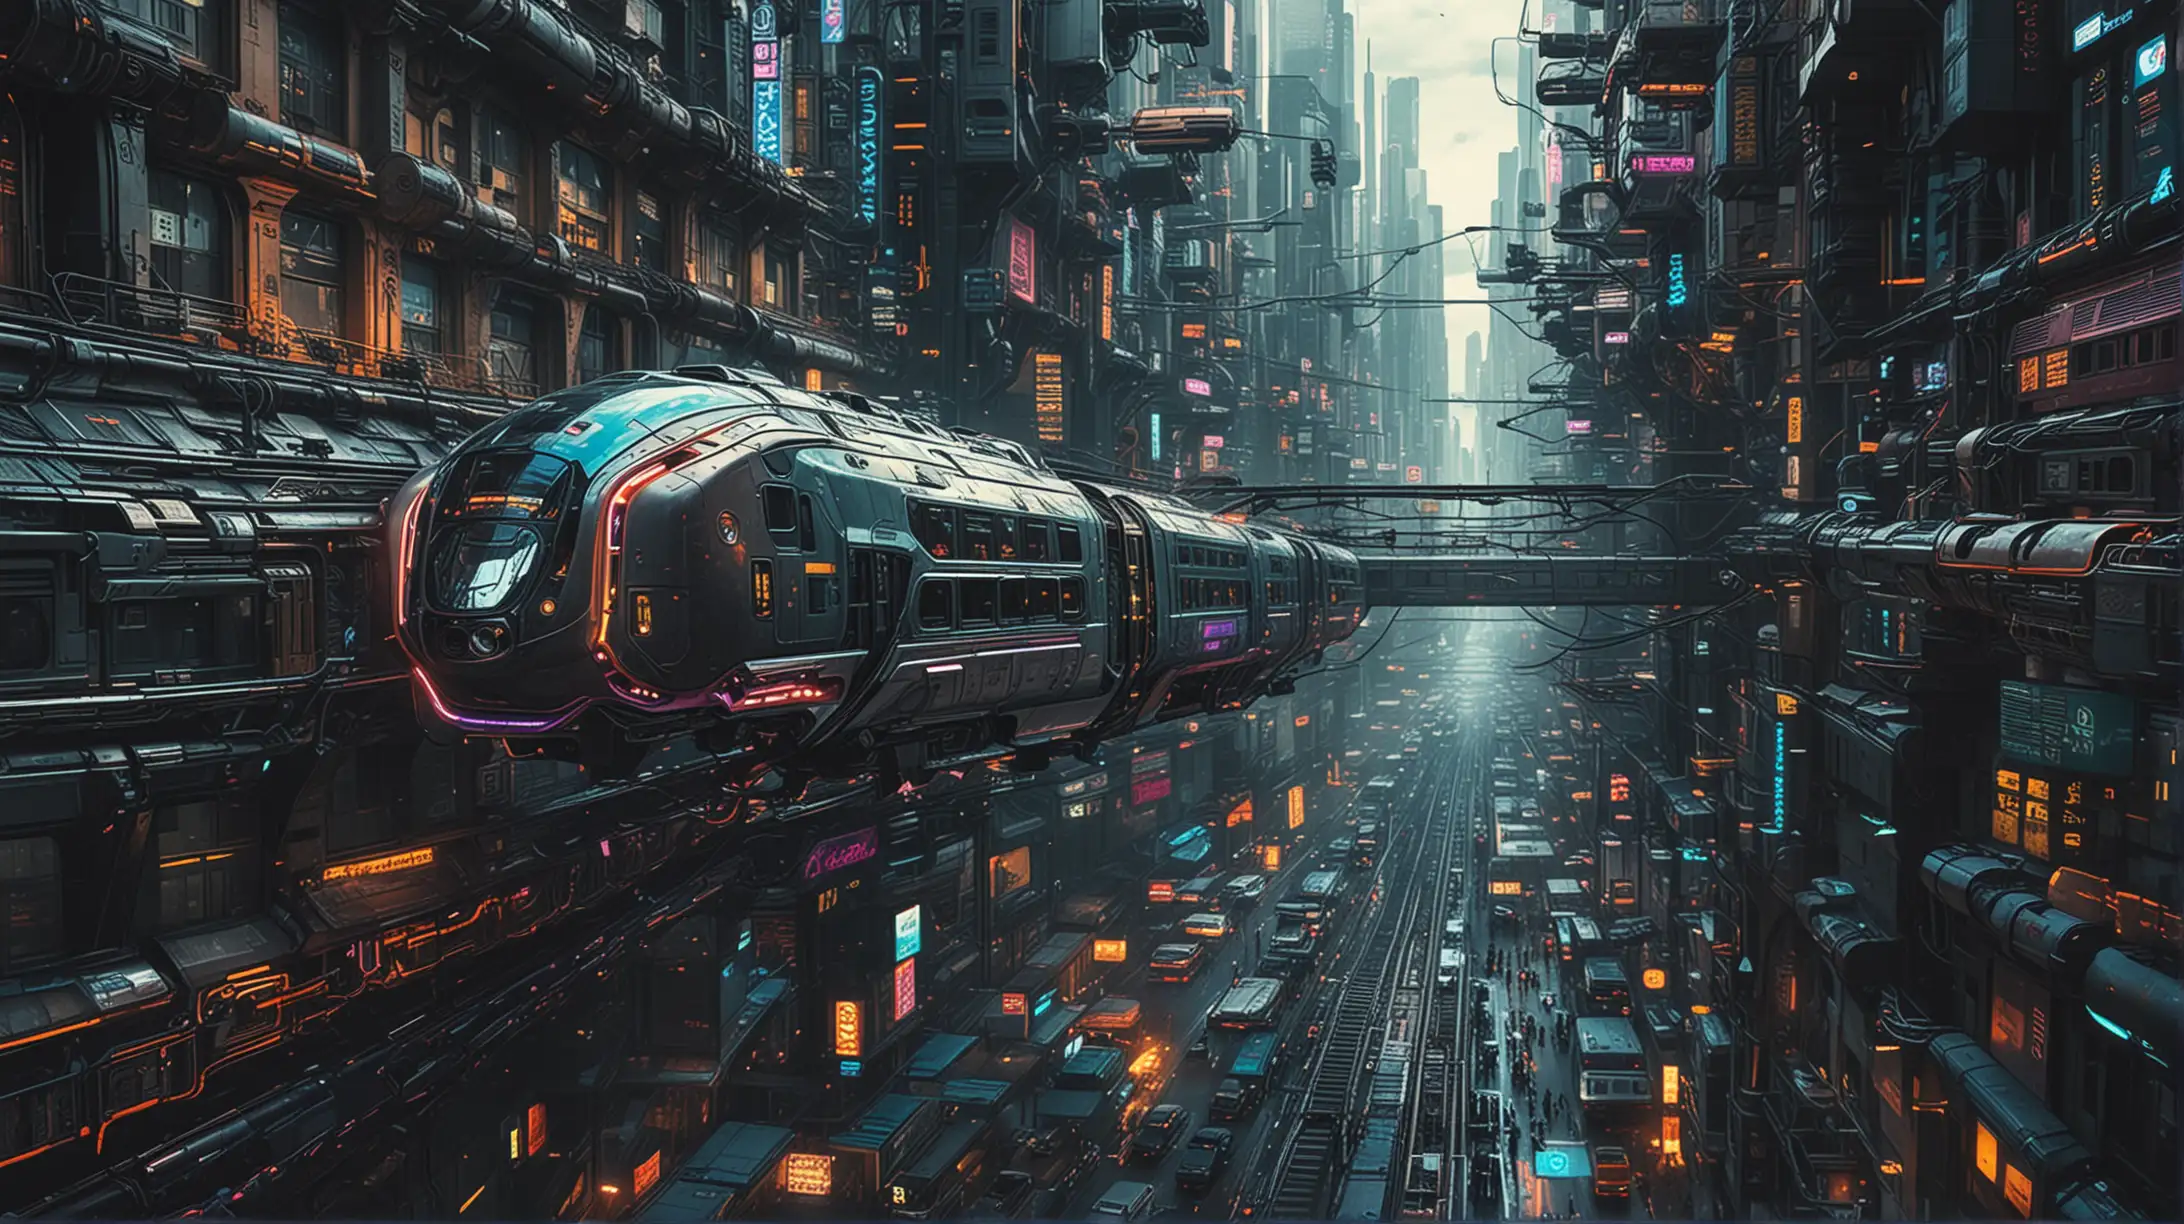 the psychodelic vision of a very futuristic overhead train running over the center of a cyberpunk city